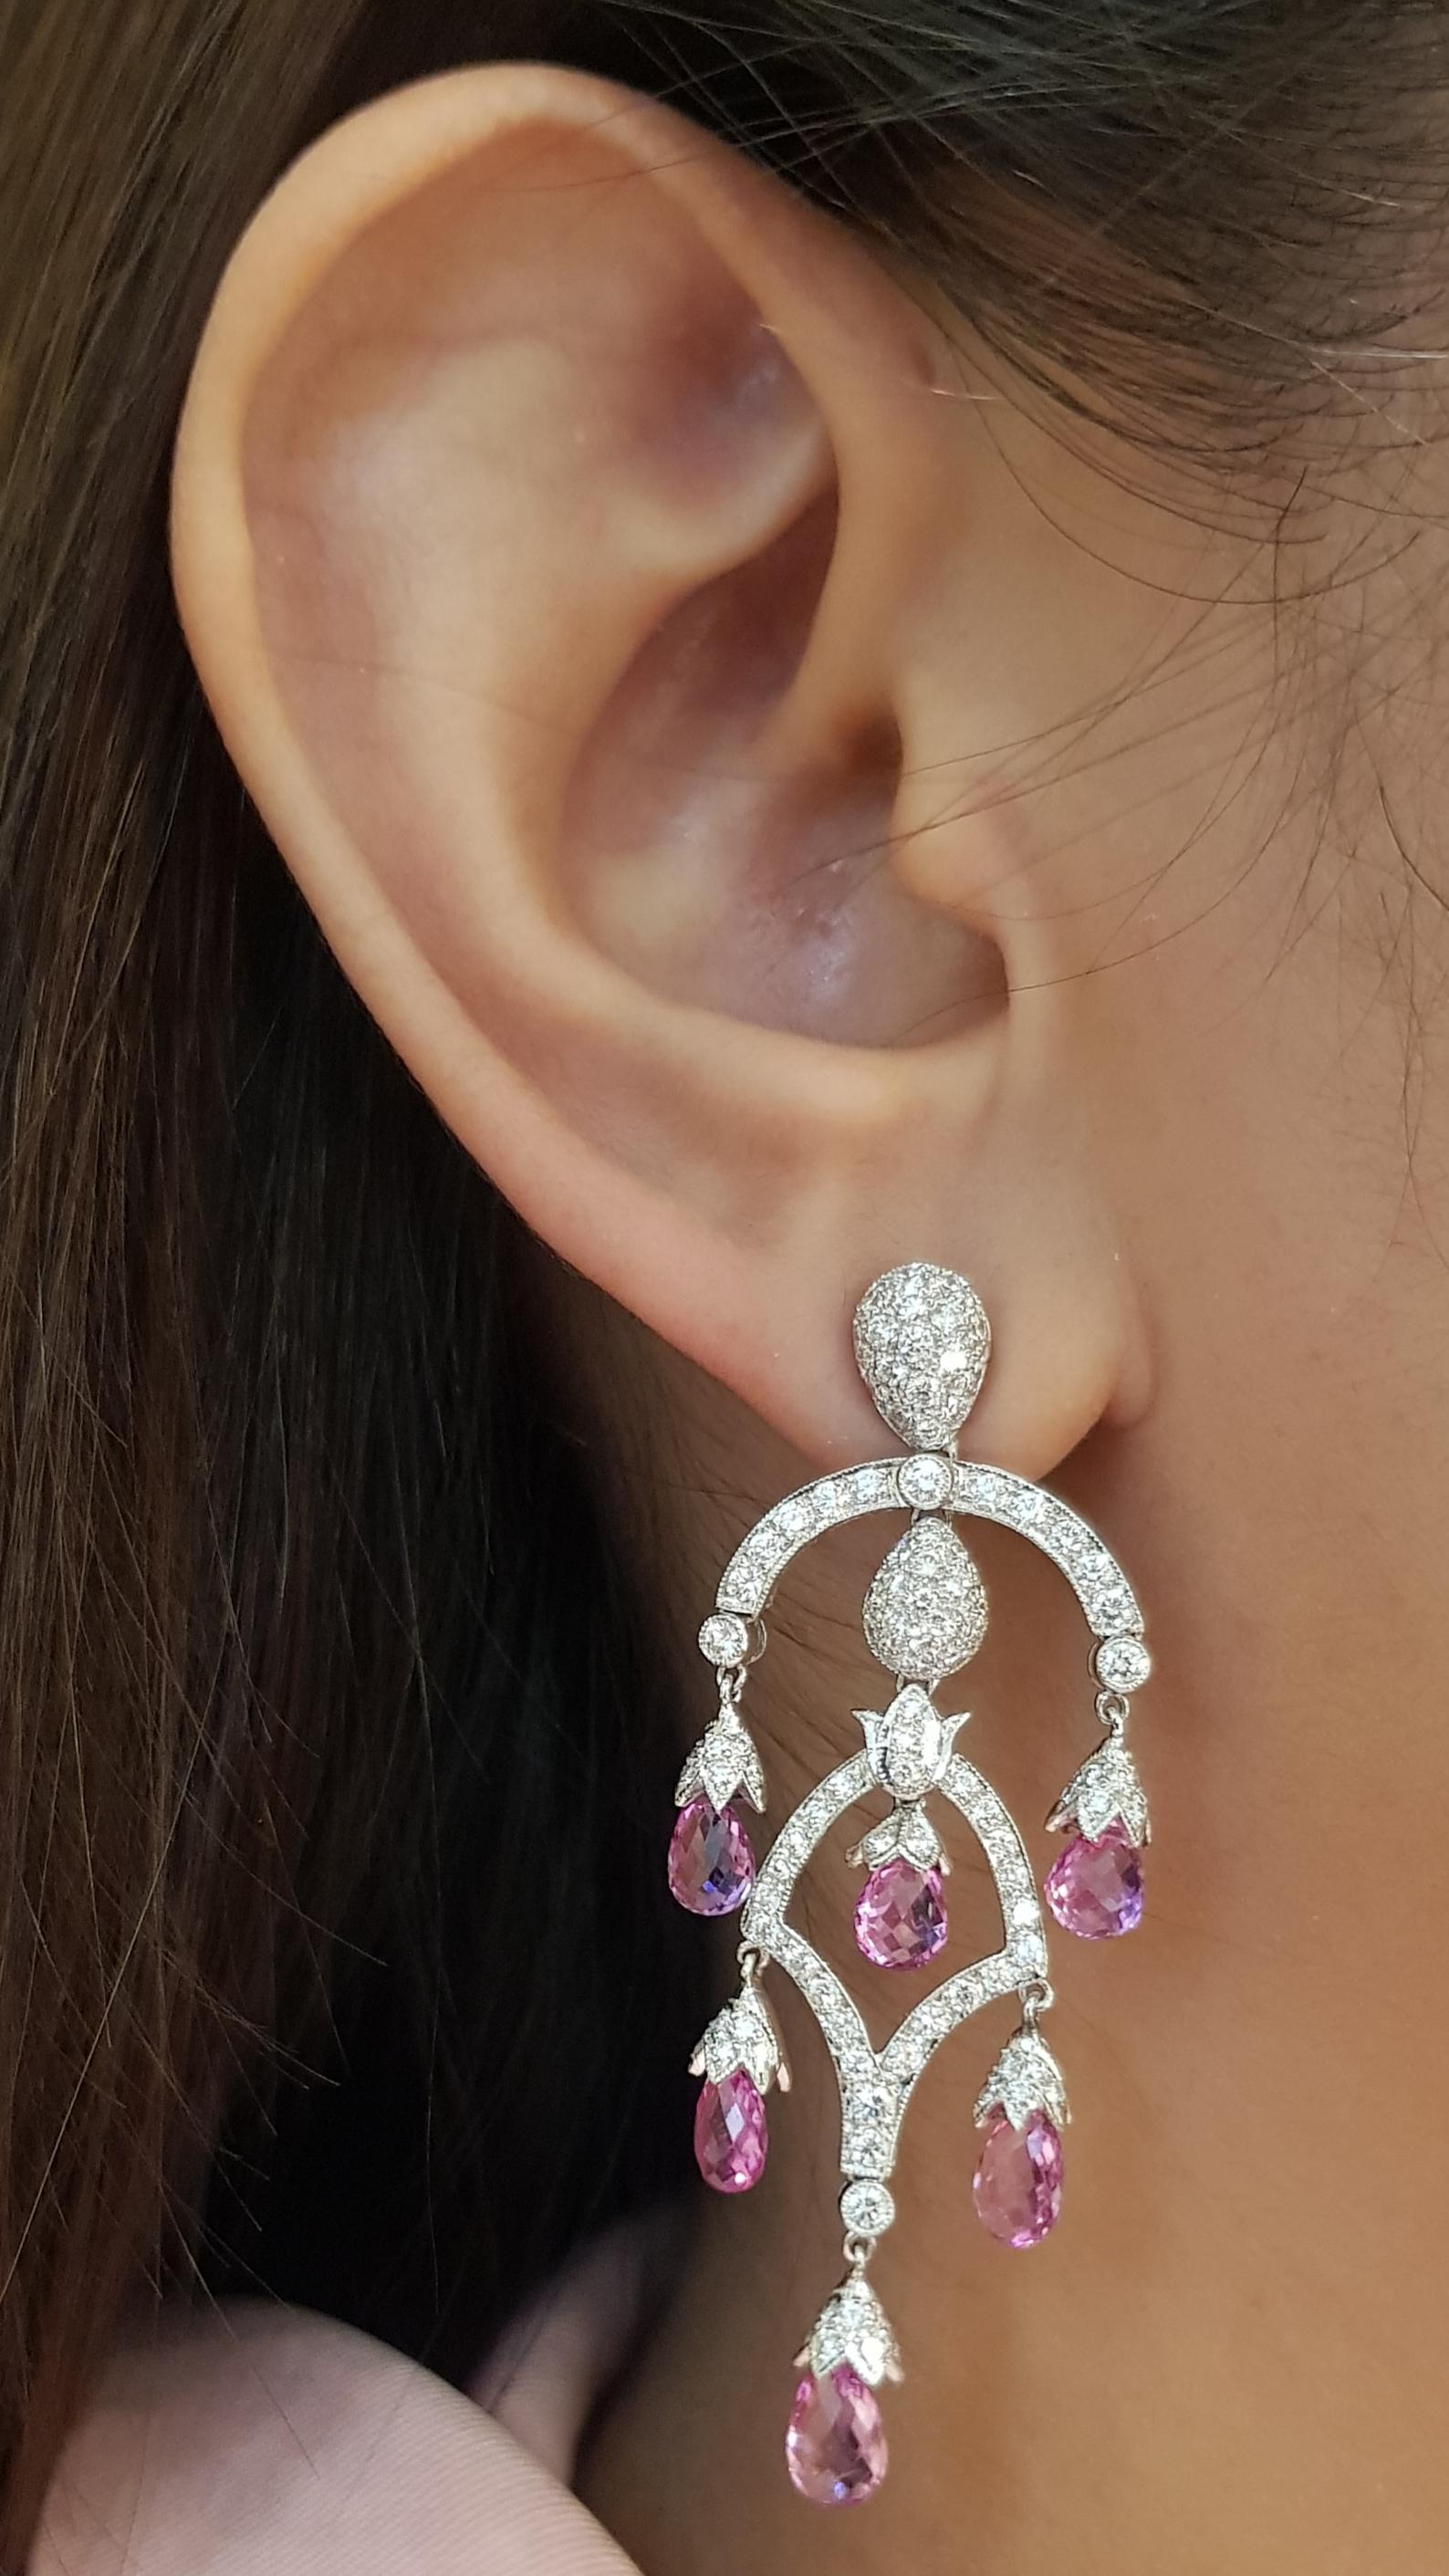 Pink Sapphire 9.09 carats with Diamond 2.24 carats Earrings set in 18 Karat White Gold Settings

Width:  2.0 cm 
Length:  5.2 cm
Total Weight: 15.4 grams

